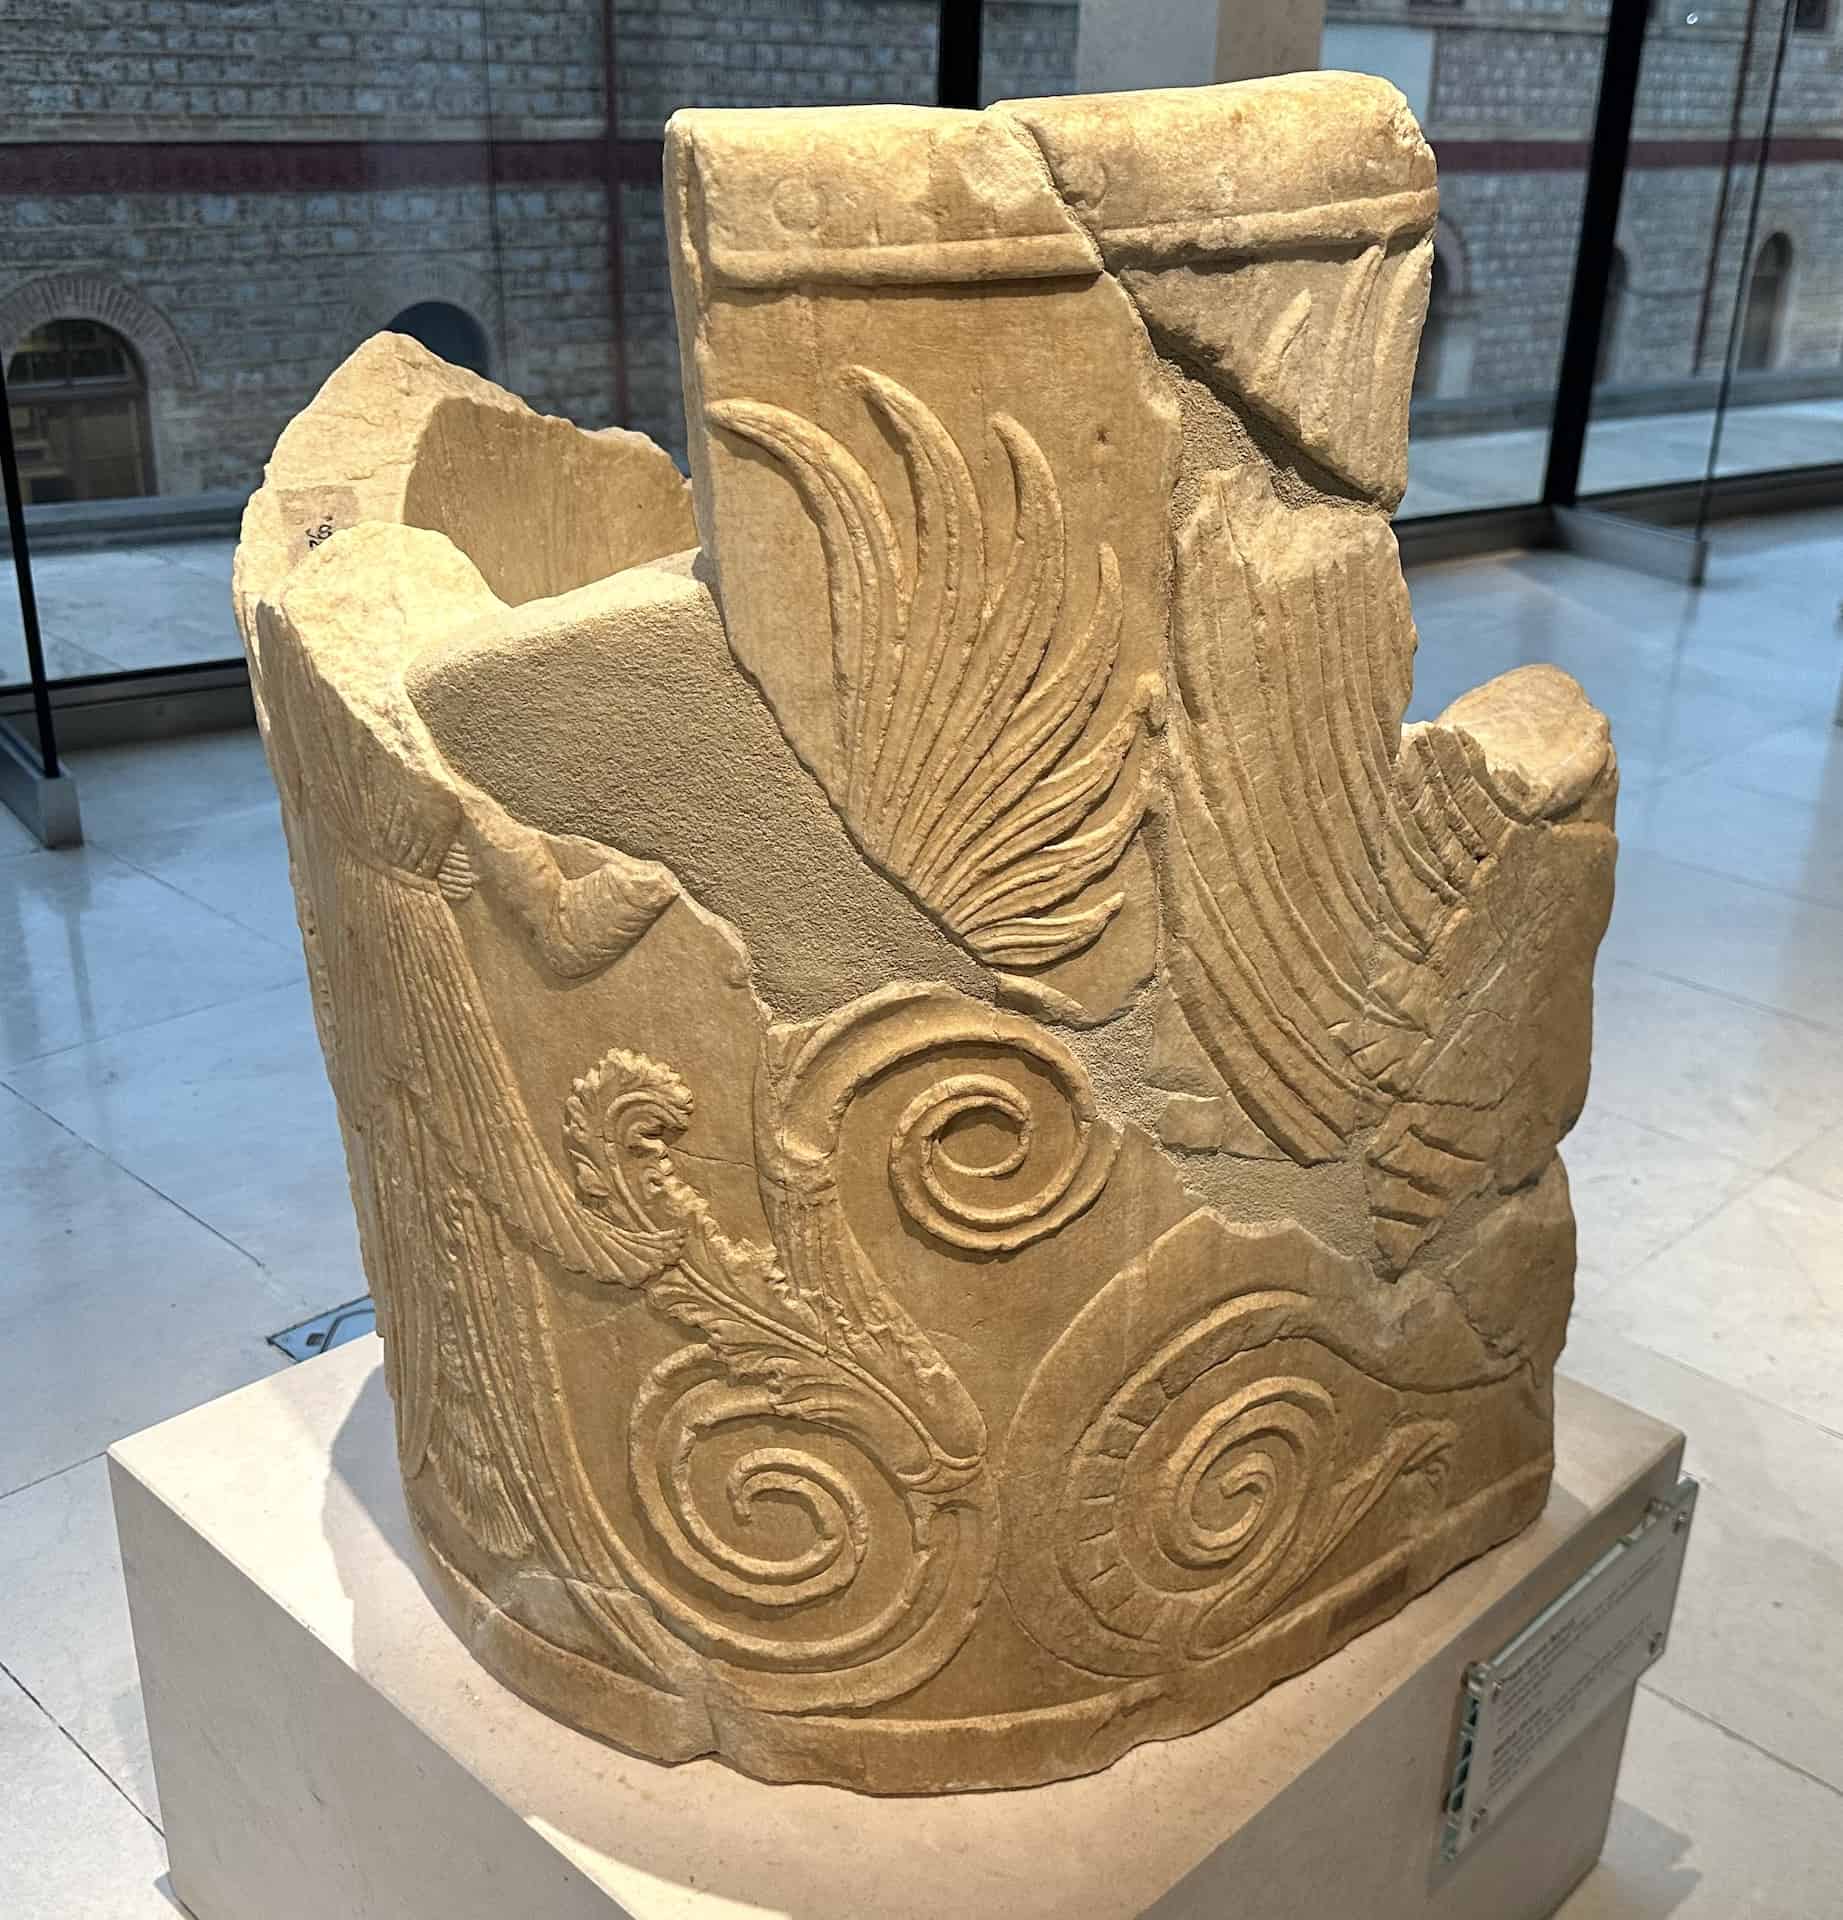 Marble throne; 4th century BC or 2nd century AD at the Acropolis Museum in Athens, Greece